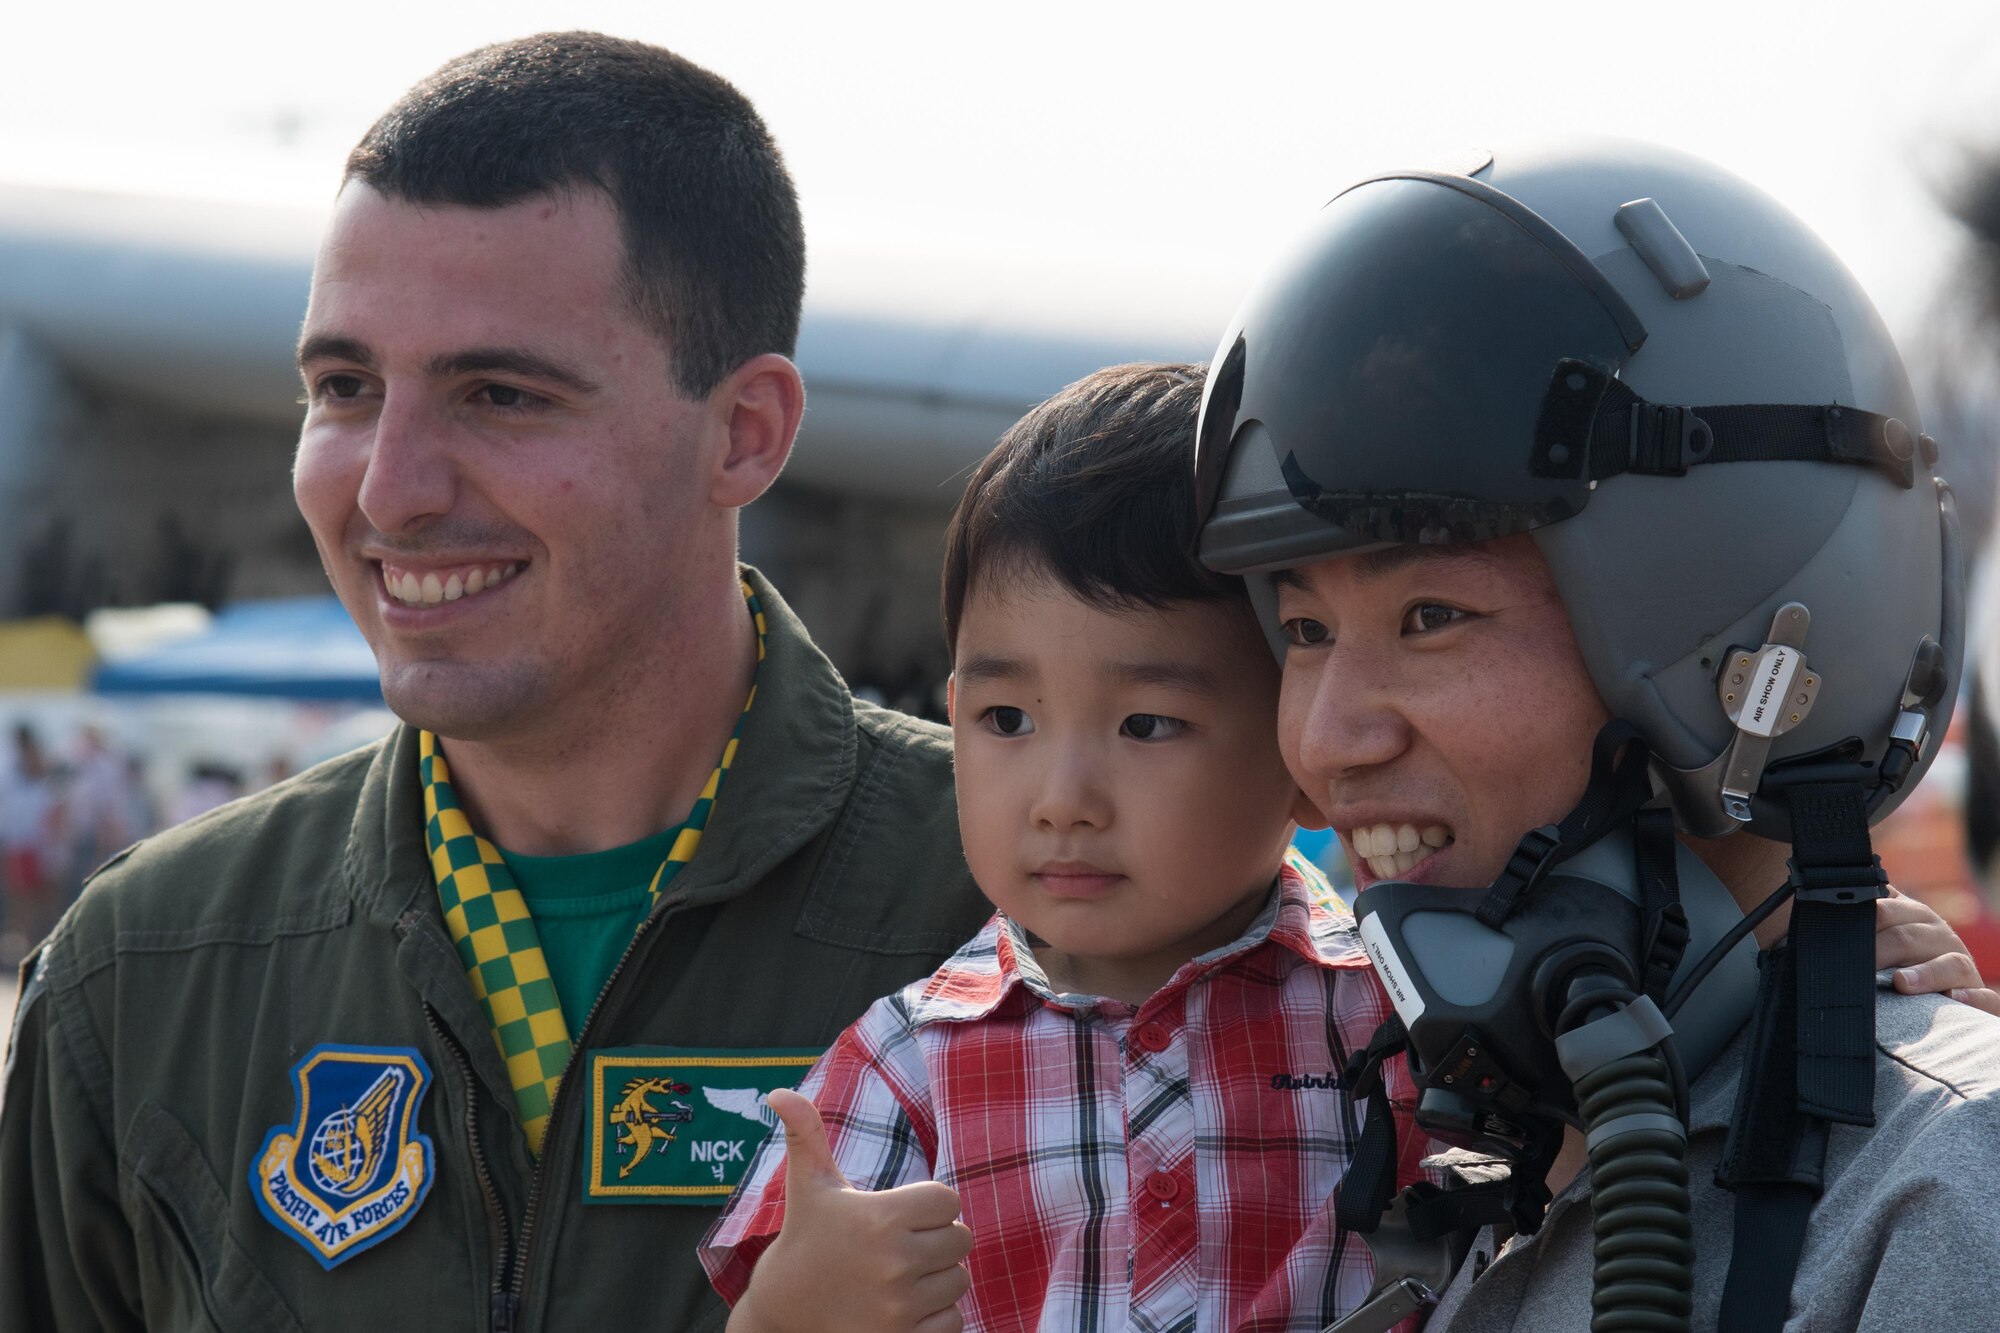 U.S. Air Force 1st Lt. Nick Castle, 25th Fighter Squadron pilot, poses for a photo with a family during Air Power Day 2016 at Osan Air Base, Republic of Korea, Sept. 24, 2016. The air show highlighted performances of many different aircraft including the Republic of Korea air force Black Eagles. (U.S. Air Force photo by Senior Airman Dillian Bamman)